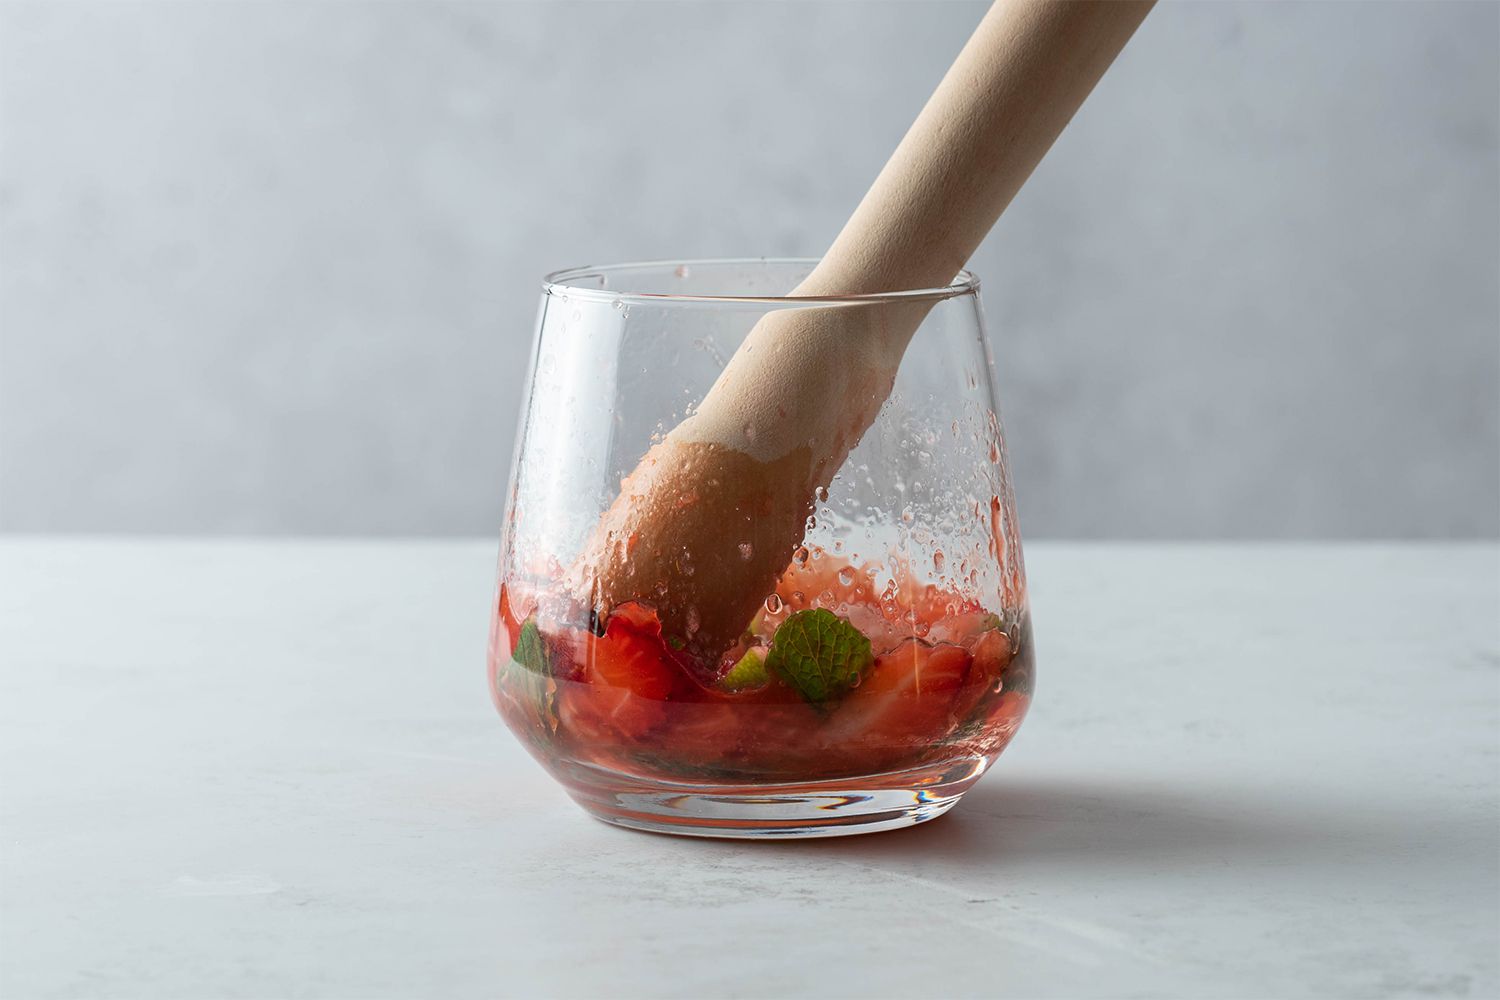 Muddle the fruit in a glass 